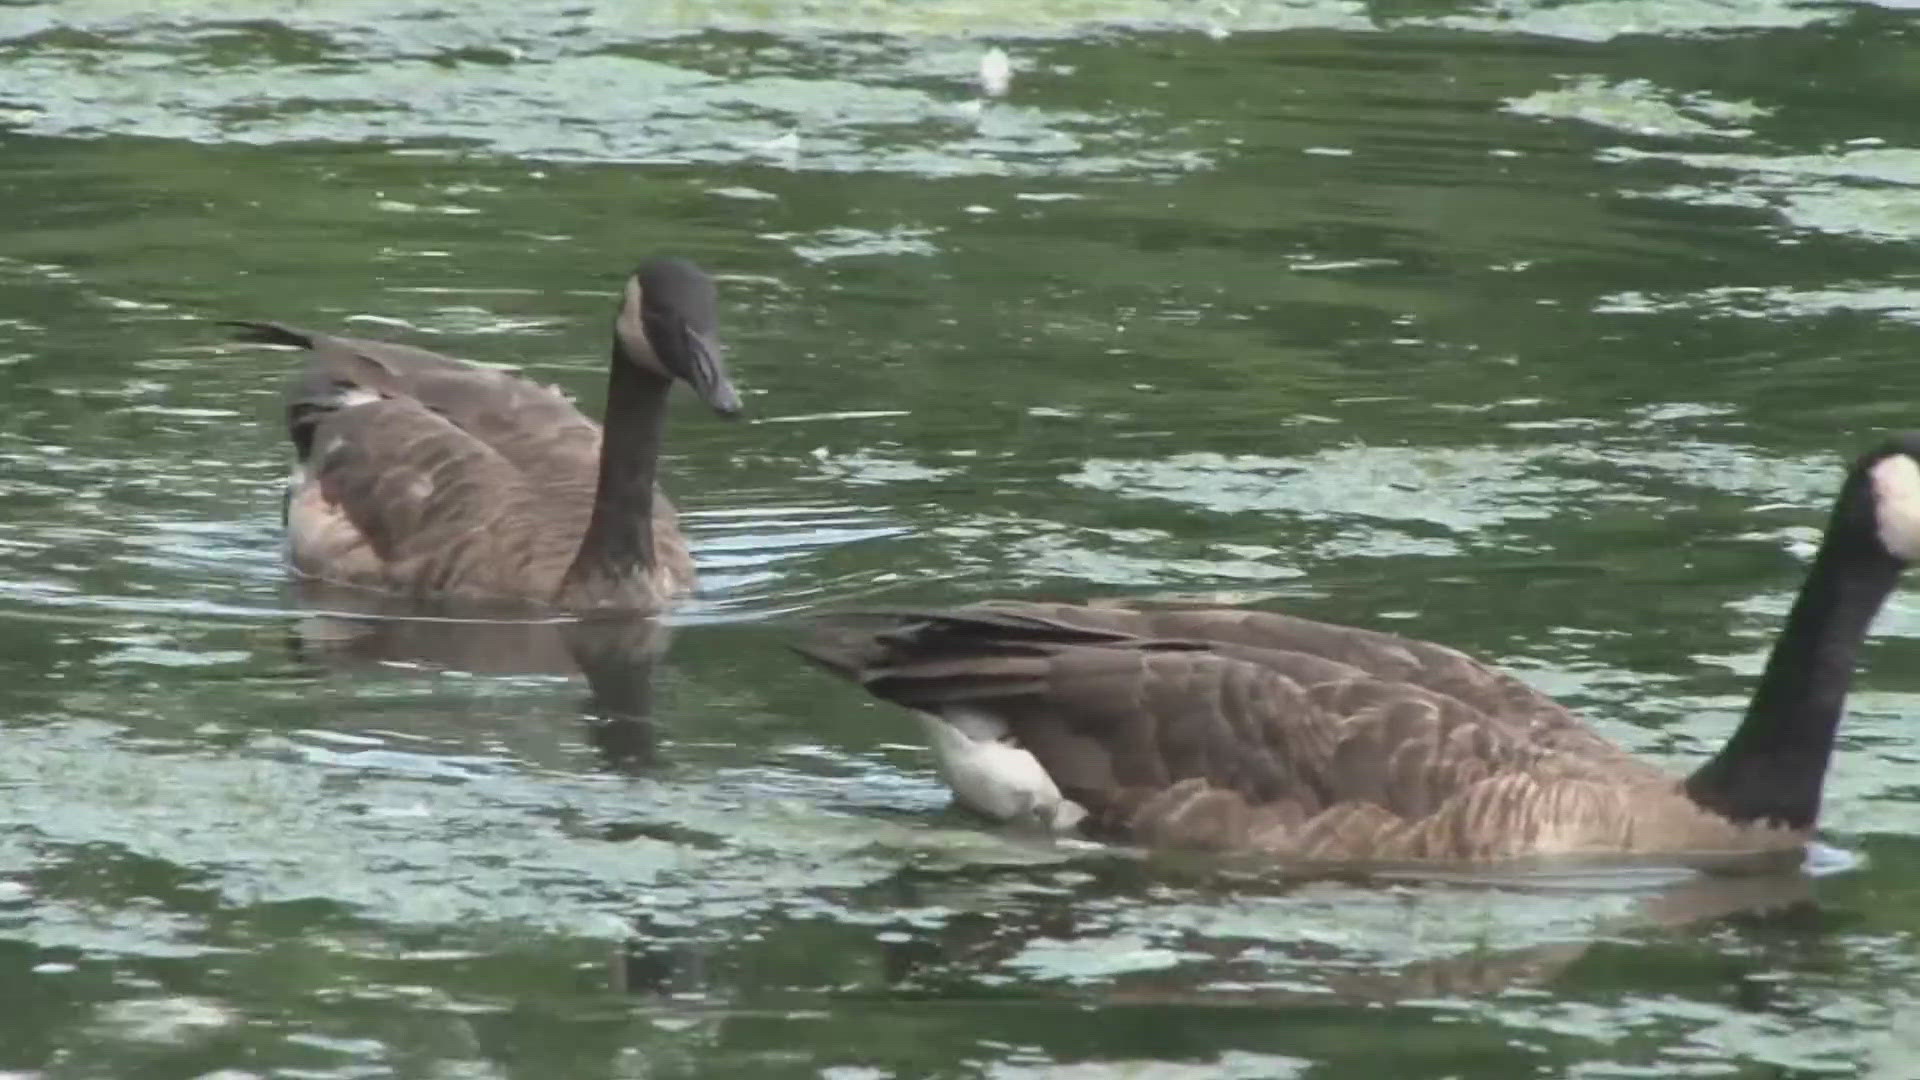 The association said it reached out to the U.S. Department of Agriculture to remove geese and euthanize them.